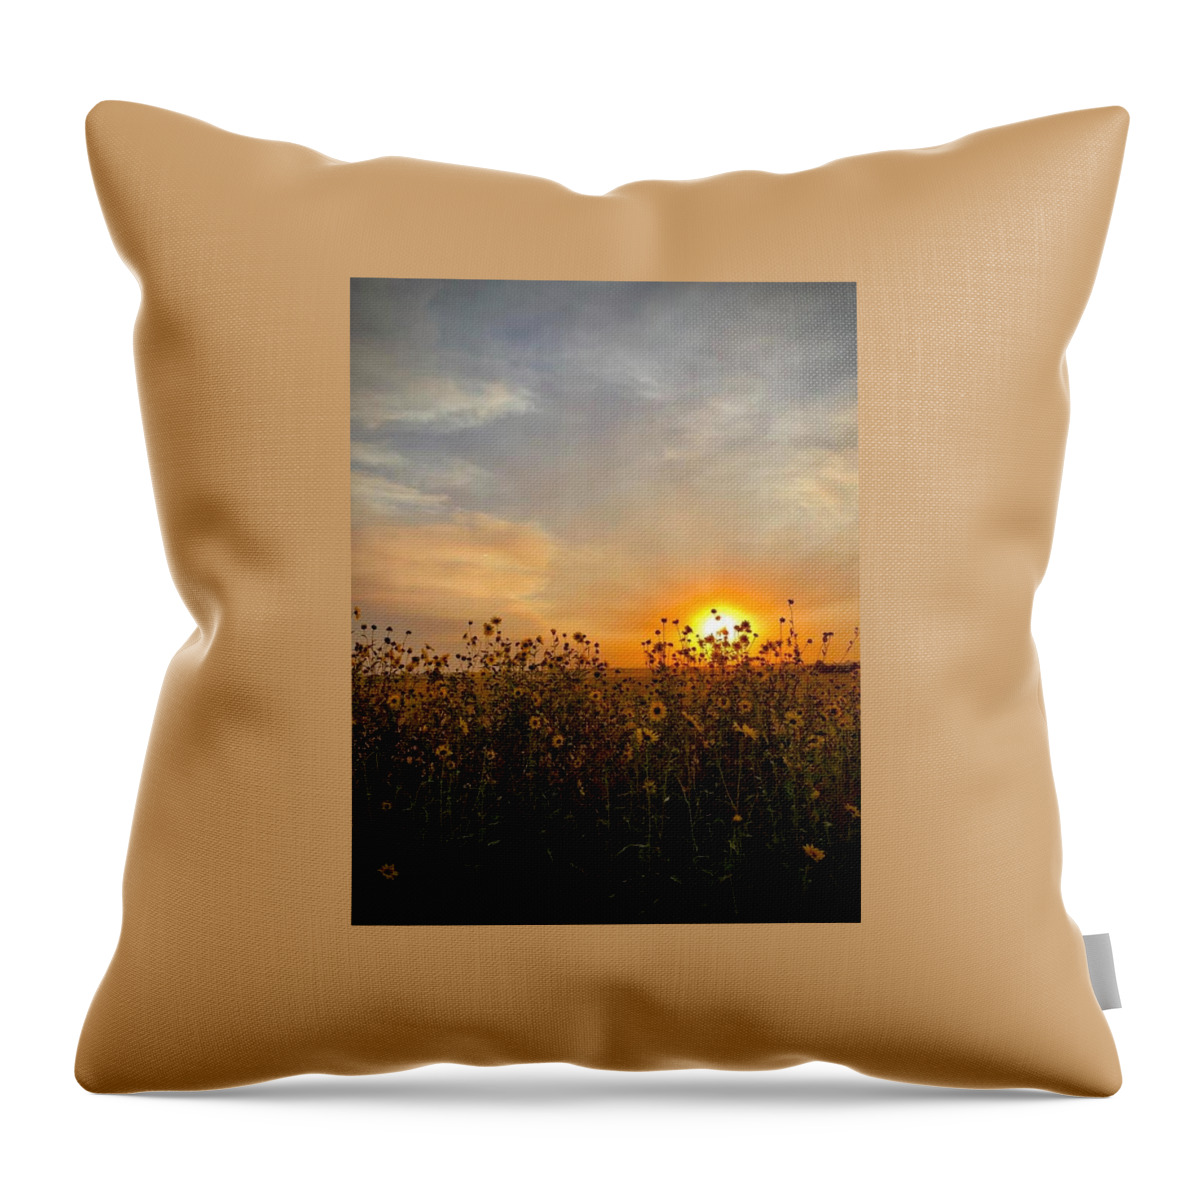 Iphonography Throw Pillow featuring the photograph iPhonography Sunset 3 by Julie Powell